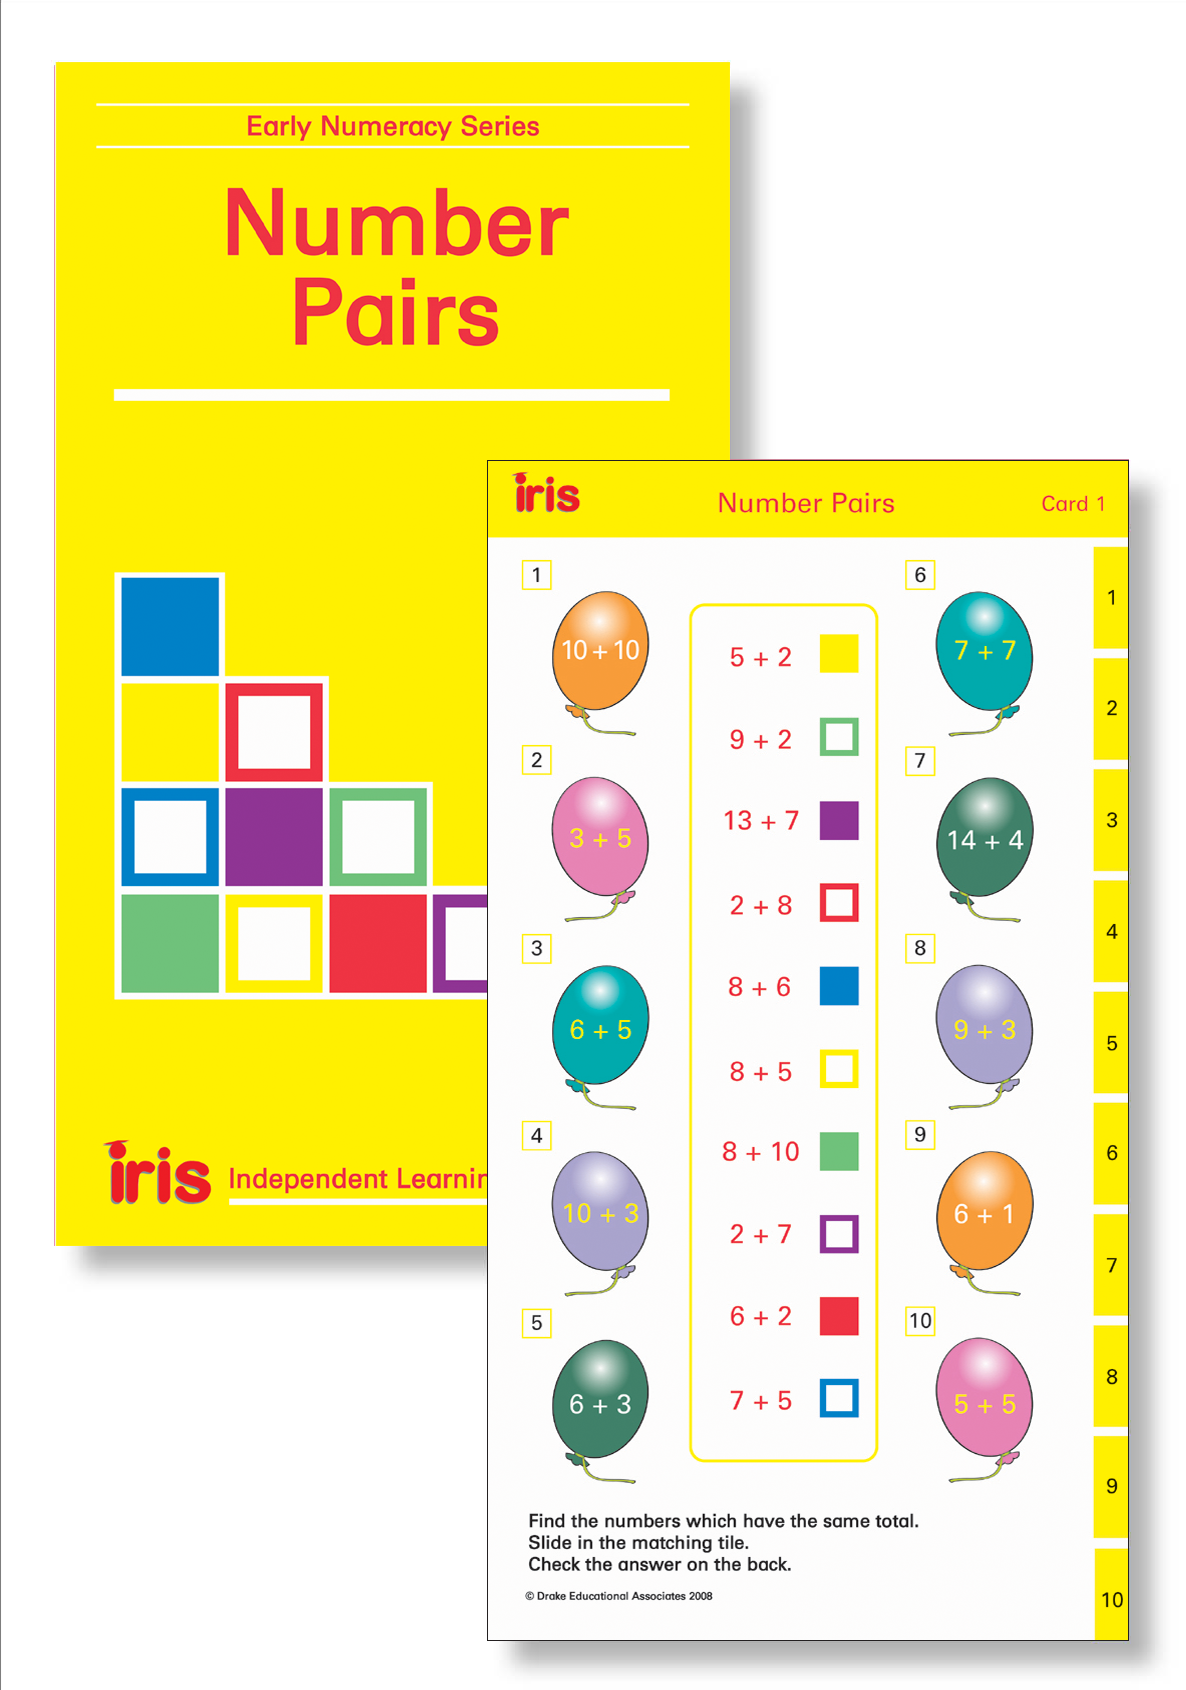 Iris Study Cards: Early Numeracy Year 2 - Number Pairs